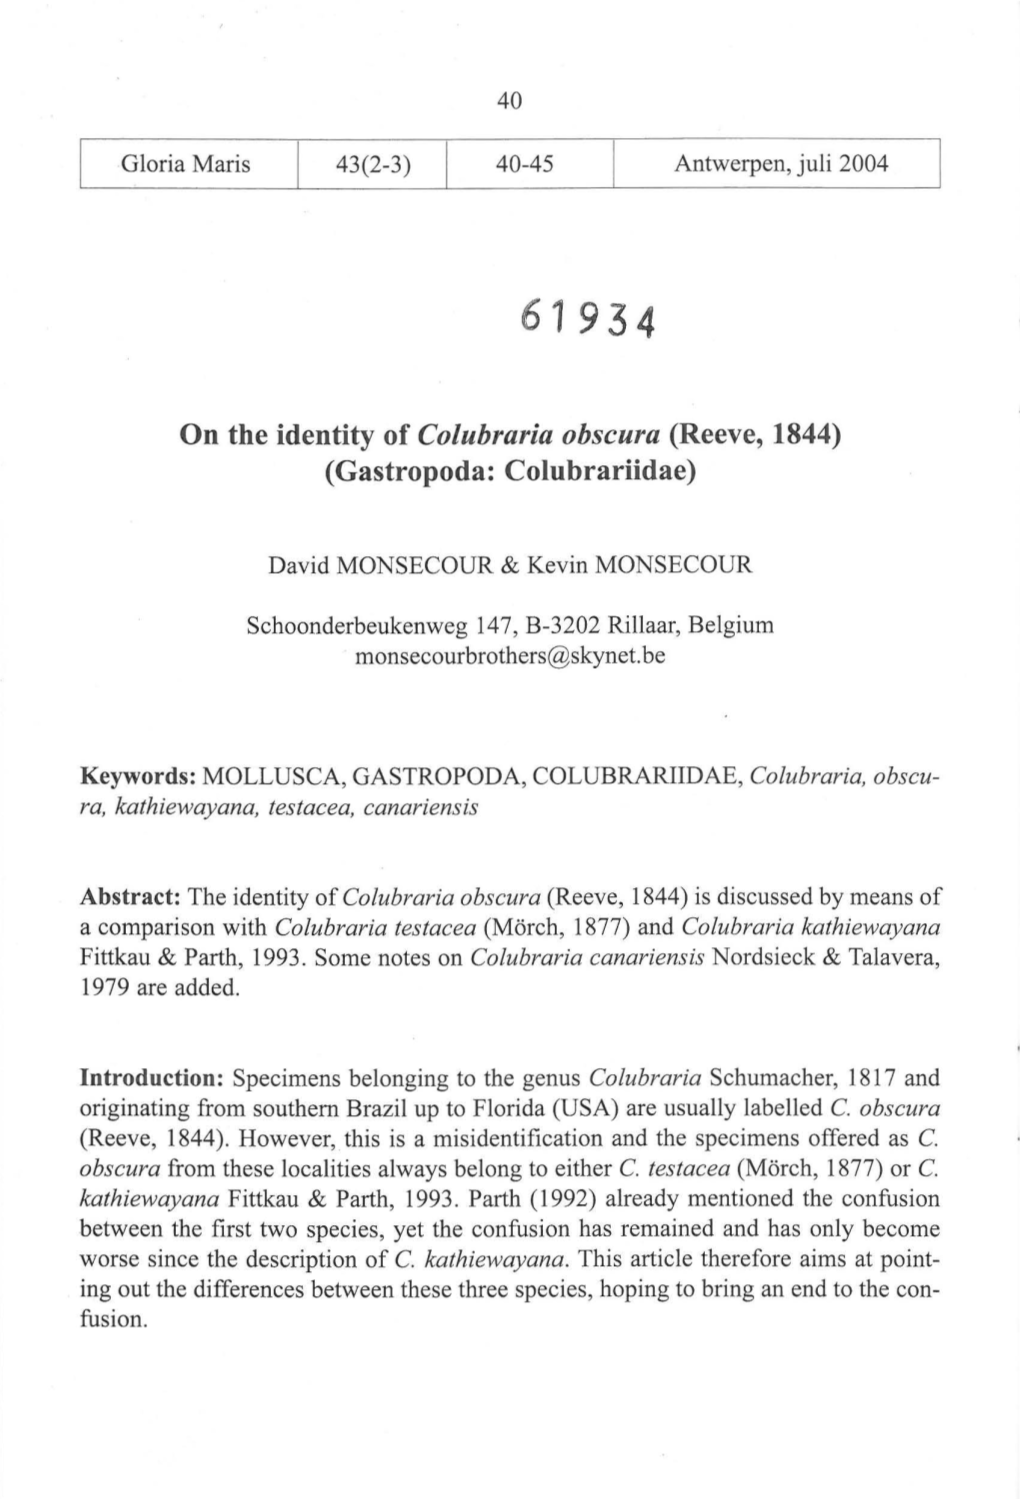 On the Identity of Colubraria Obscura (Reeve, 1844) (Gastropoda: Colubrariidae)